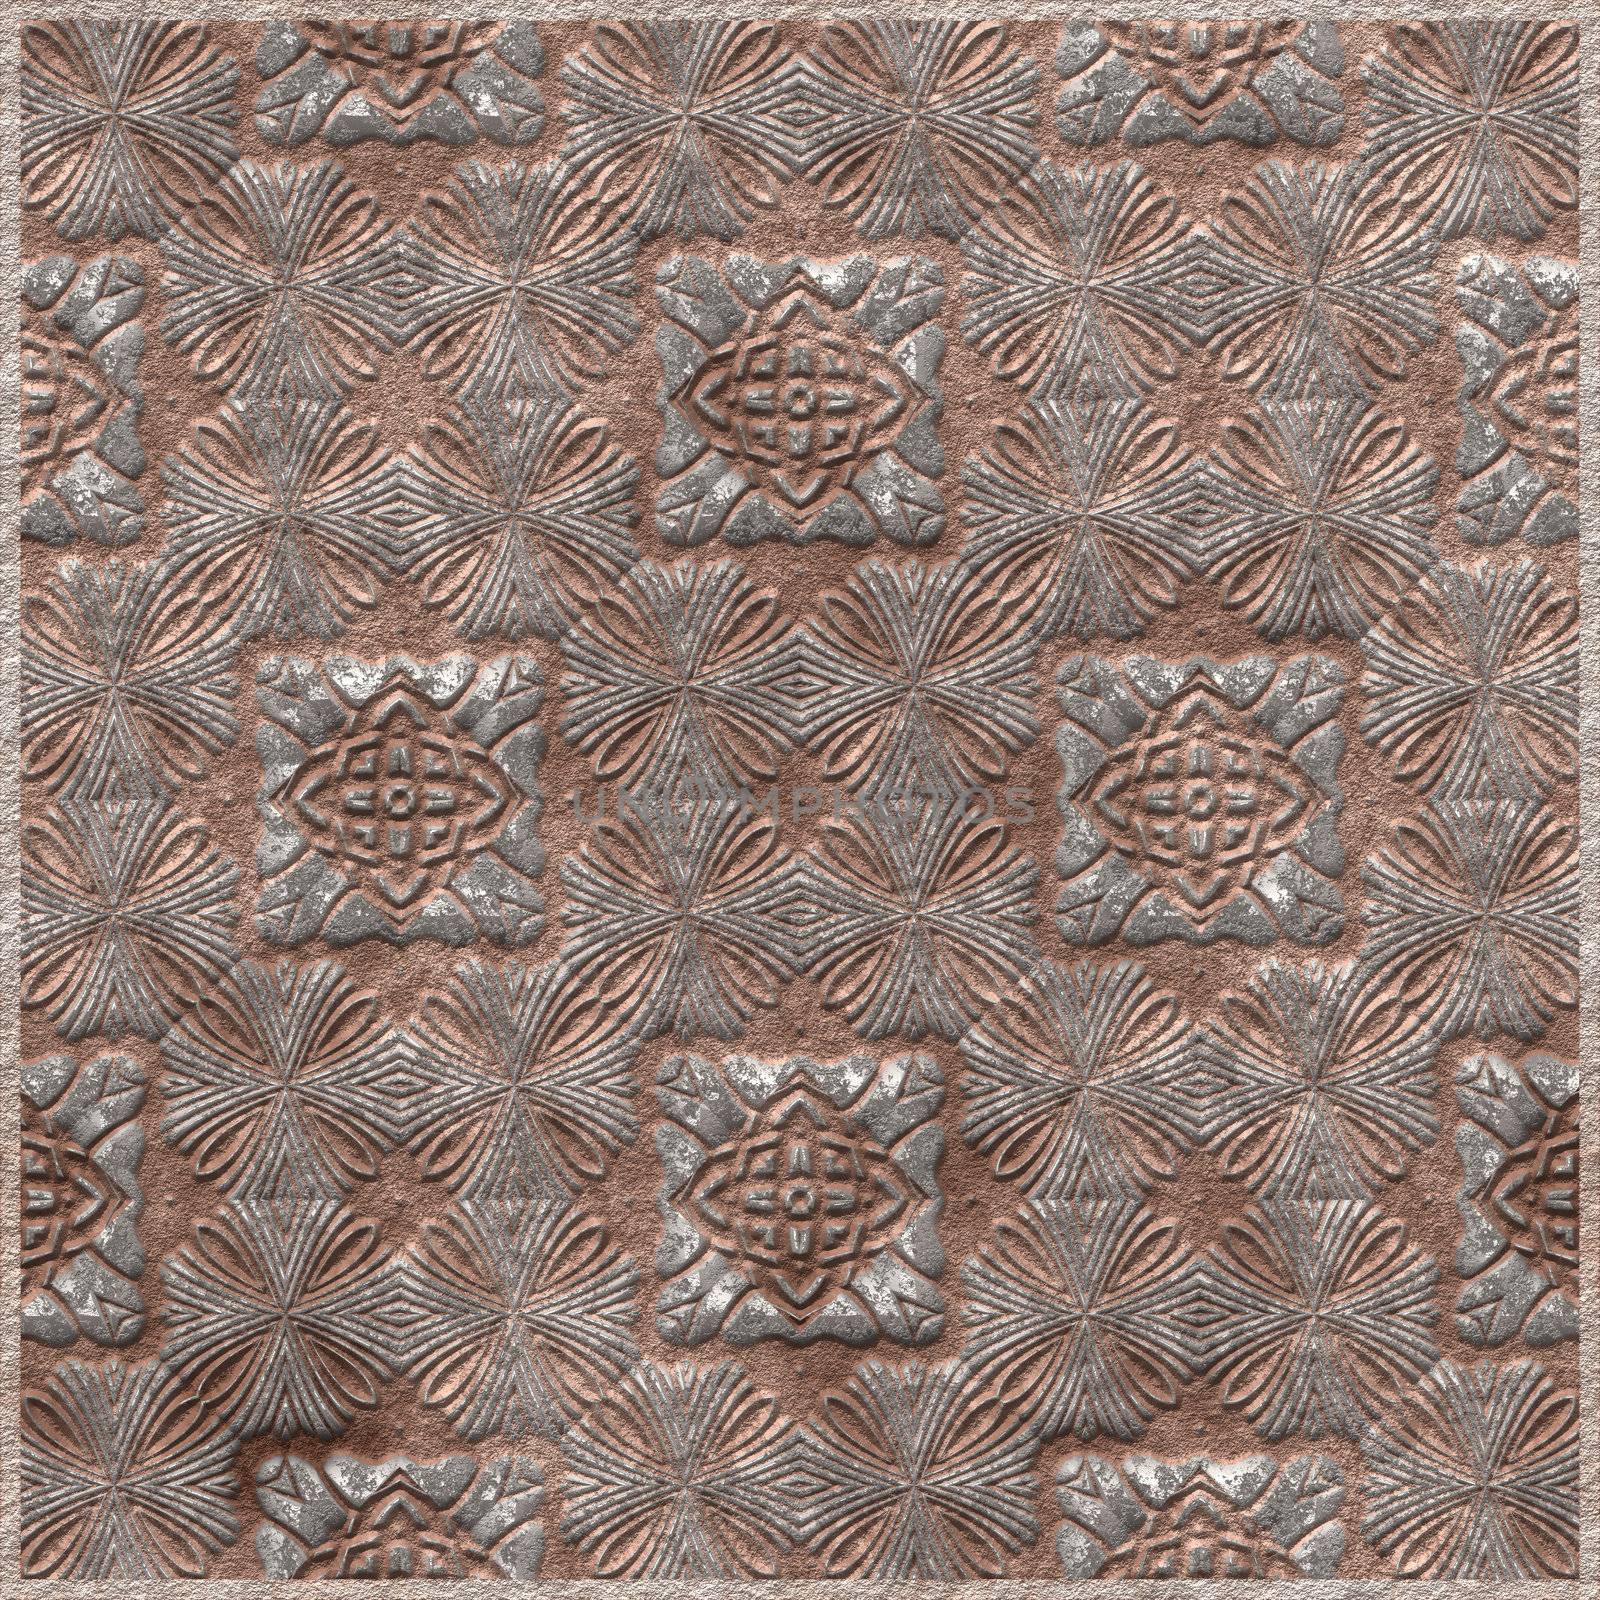 Tile with antique pattern